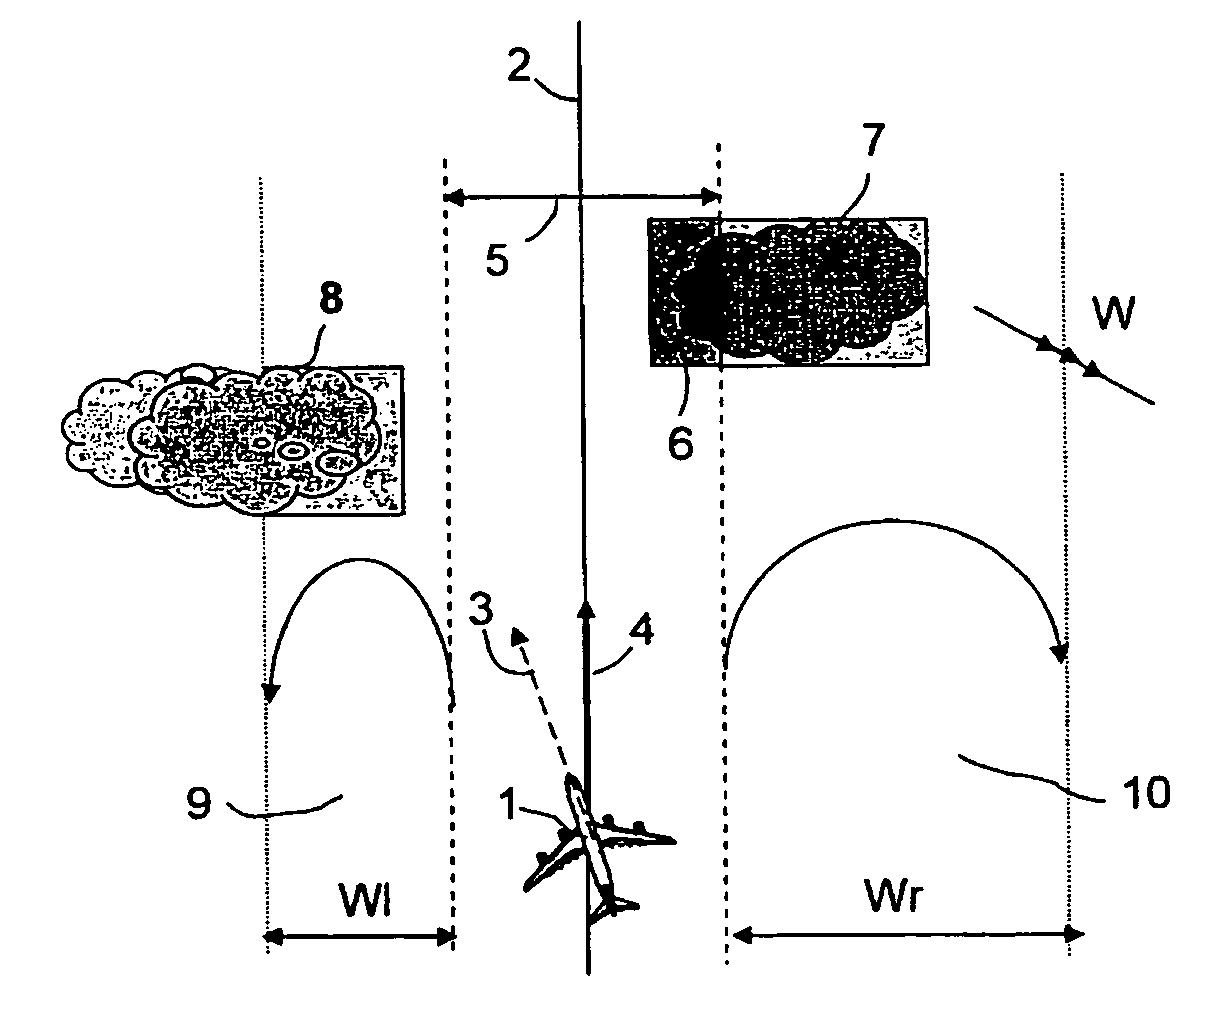 Method of indicating the lateral manoeuvre margins on either side of the flight plan path of an aircraft